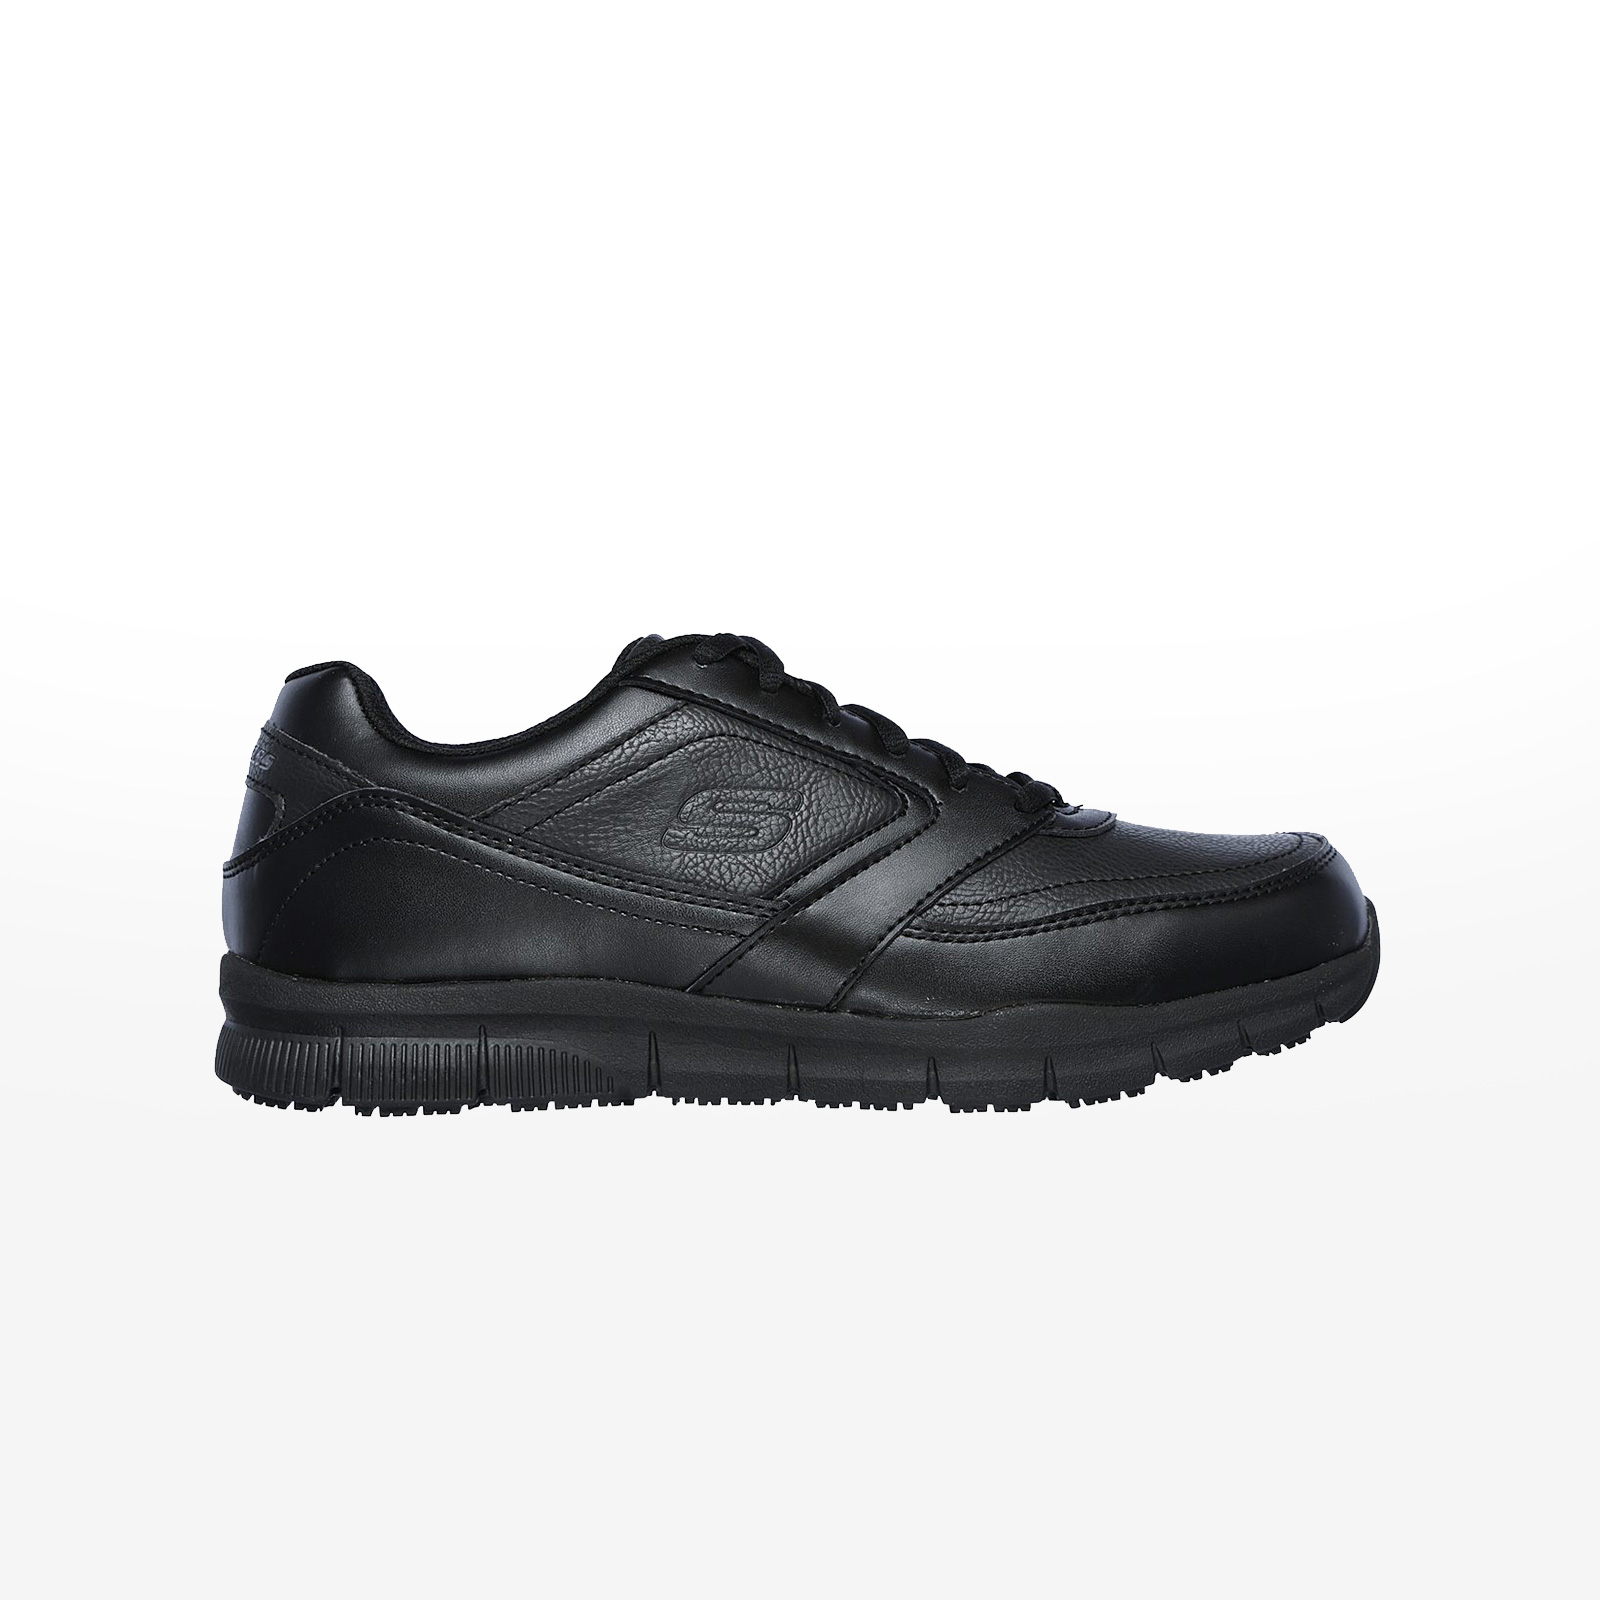 Skechers - LACE UP ATHLETIC W/ SR OUTSOLE - ΜΑΥΡΟ Ανδρικά > Παπούτσια > Αθλητικά > Παπούτσι Low Cut